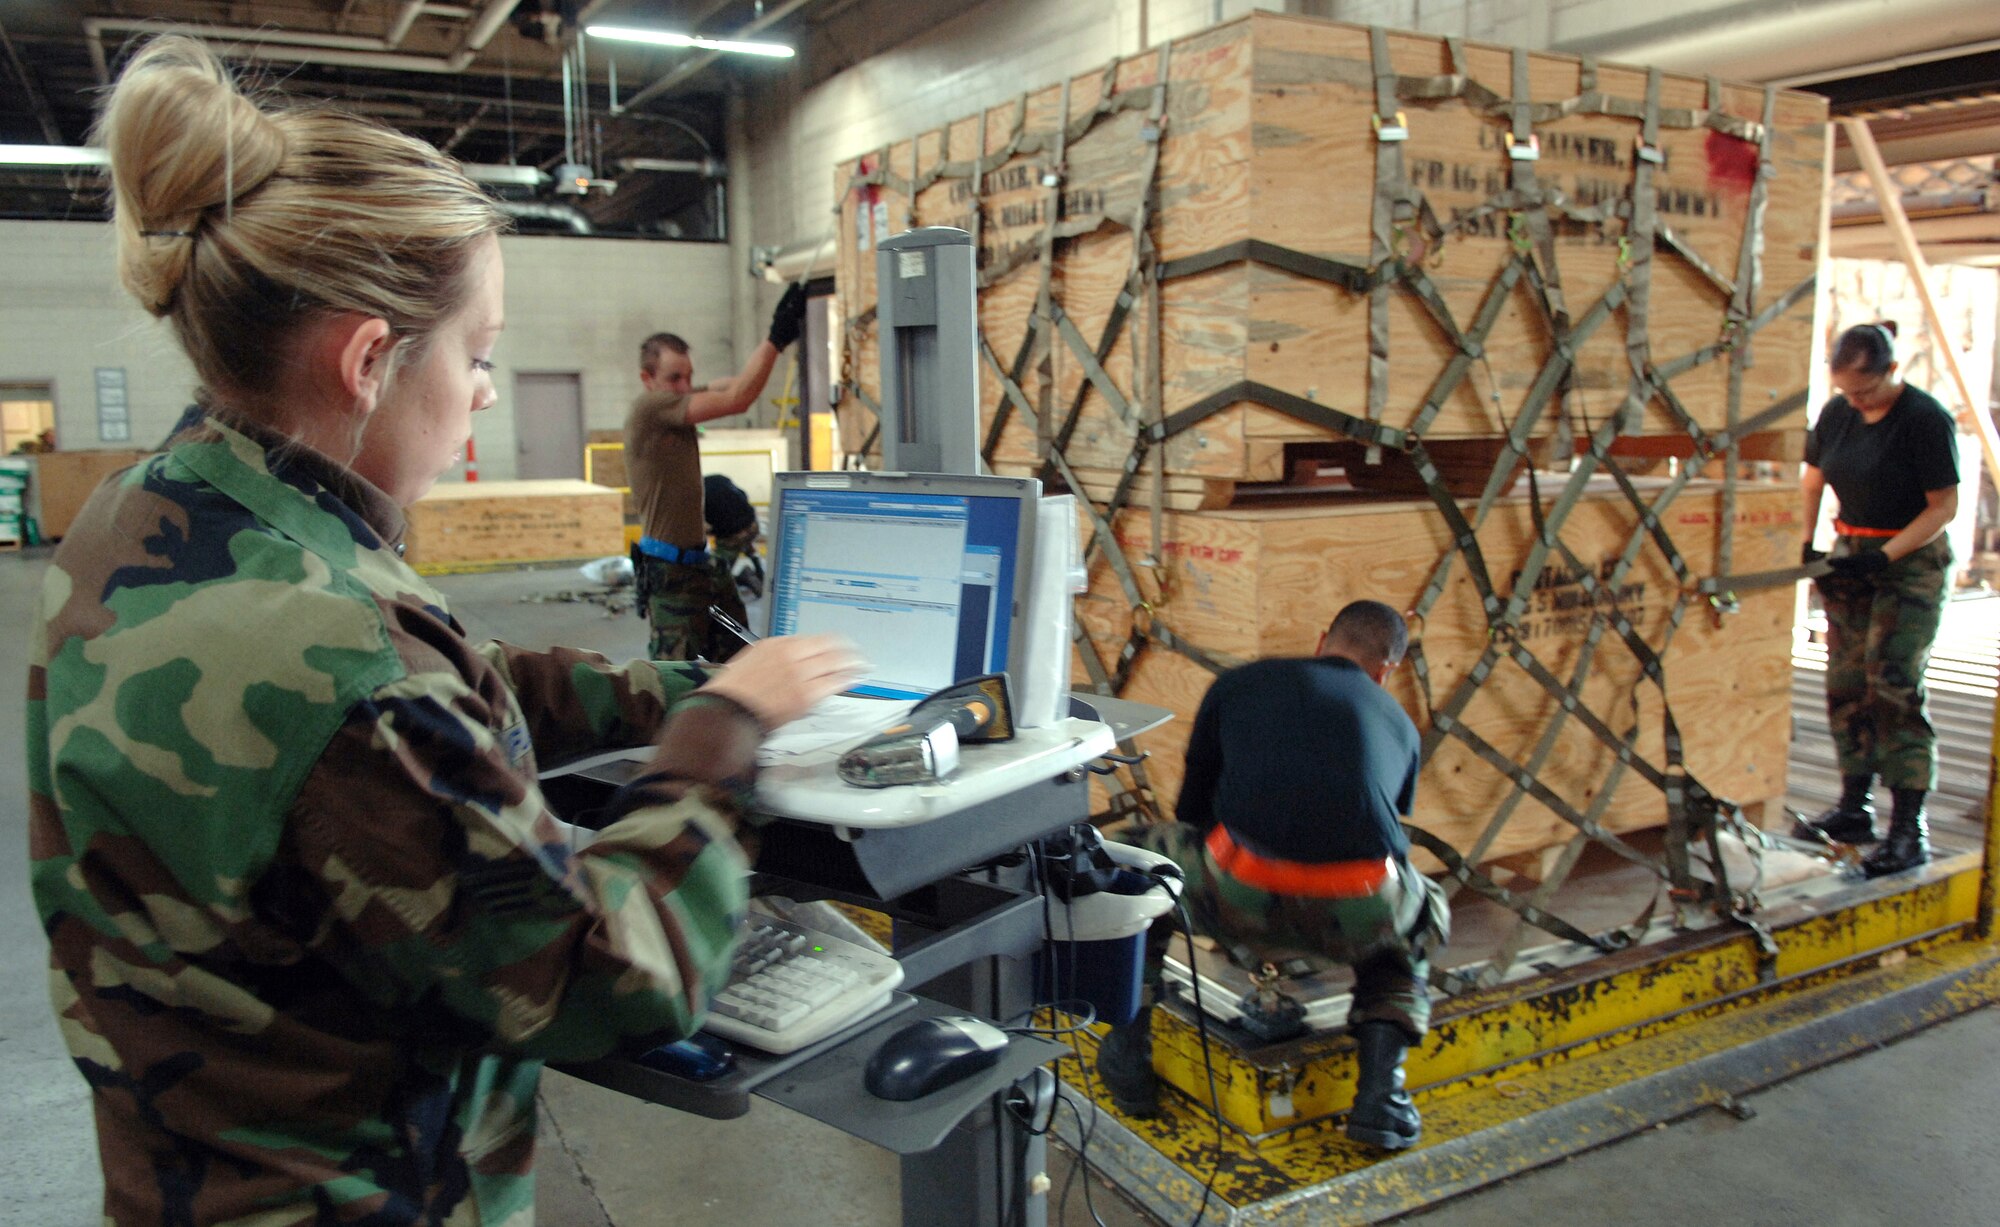 Senior Airman Cecilia Fuller, foreground, checks the cargo pallet content listing to ensure all pallets are properly labeled while fellow airmen strap netting down to secure cargo to the pallet at Charleston Air Force Base, S.C., Oct. 25, 2006. Airman Fuller is an air transportation specialist with the 437th Aerial Port Squadron, Charleston Air Force Base, S.C. (U.S. Air Force photo/Tech. Sgt. Larry A. Simmons)